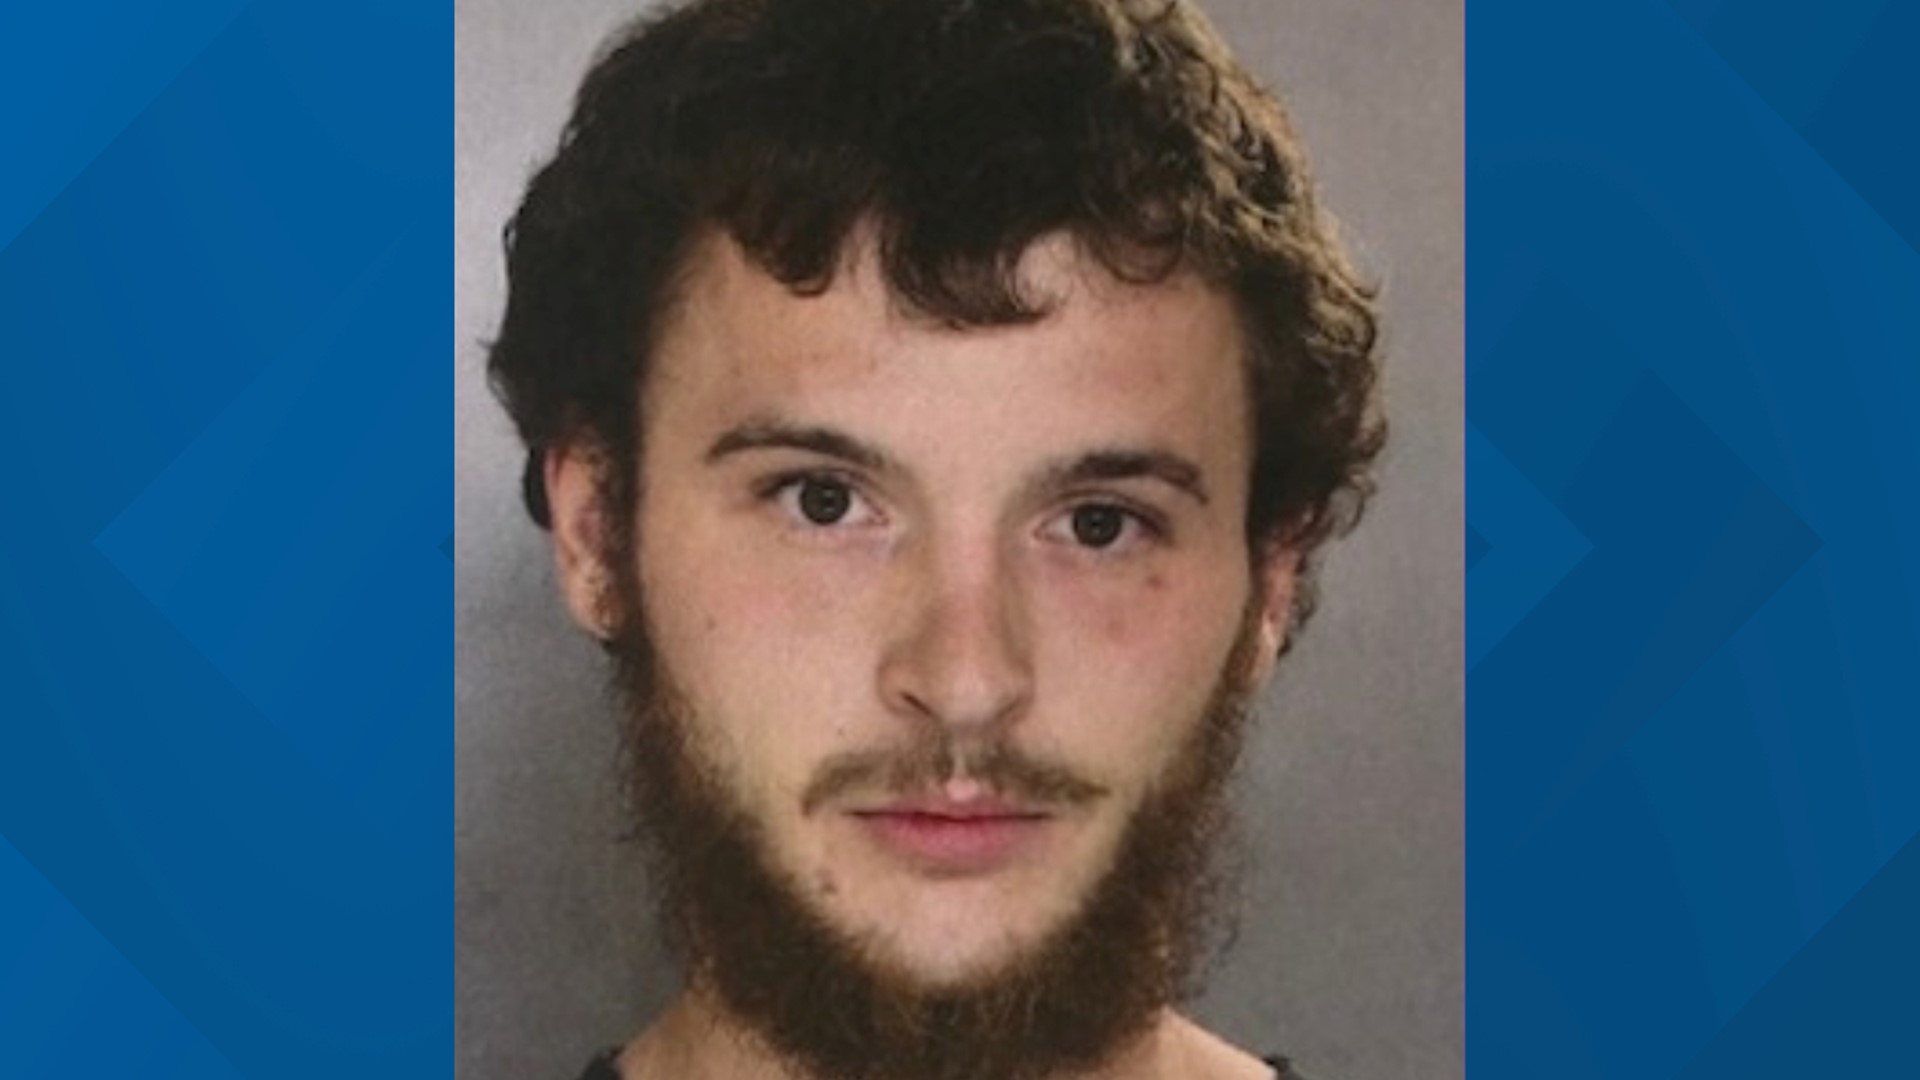 Aaron Sherman attacked a woman on the Lackawanna County Heritage Trail as she walked to work in September of 2019.